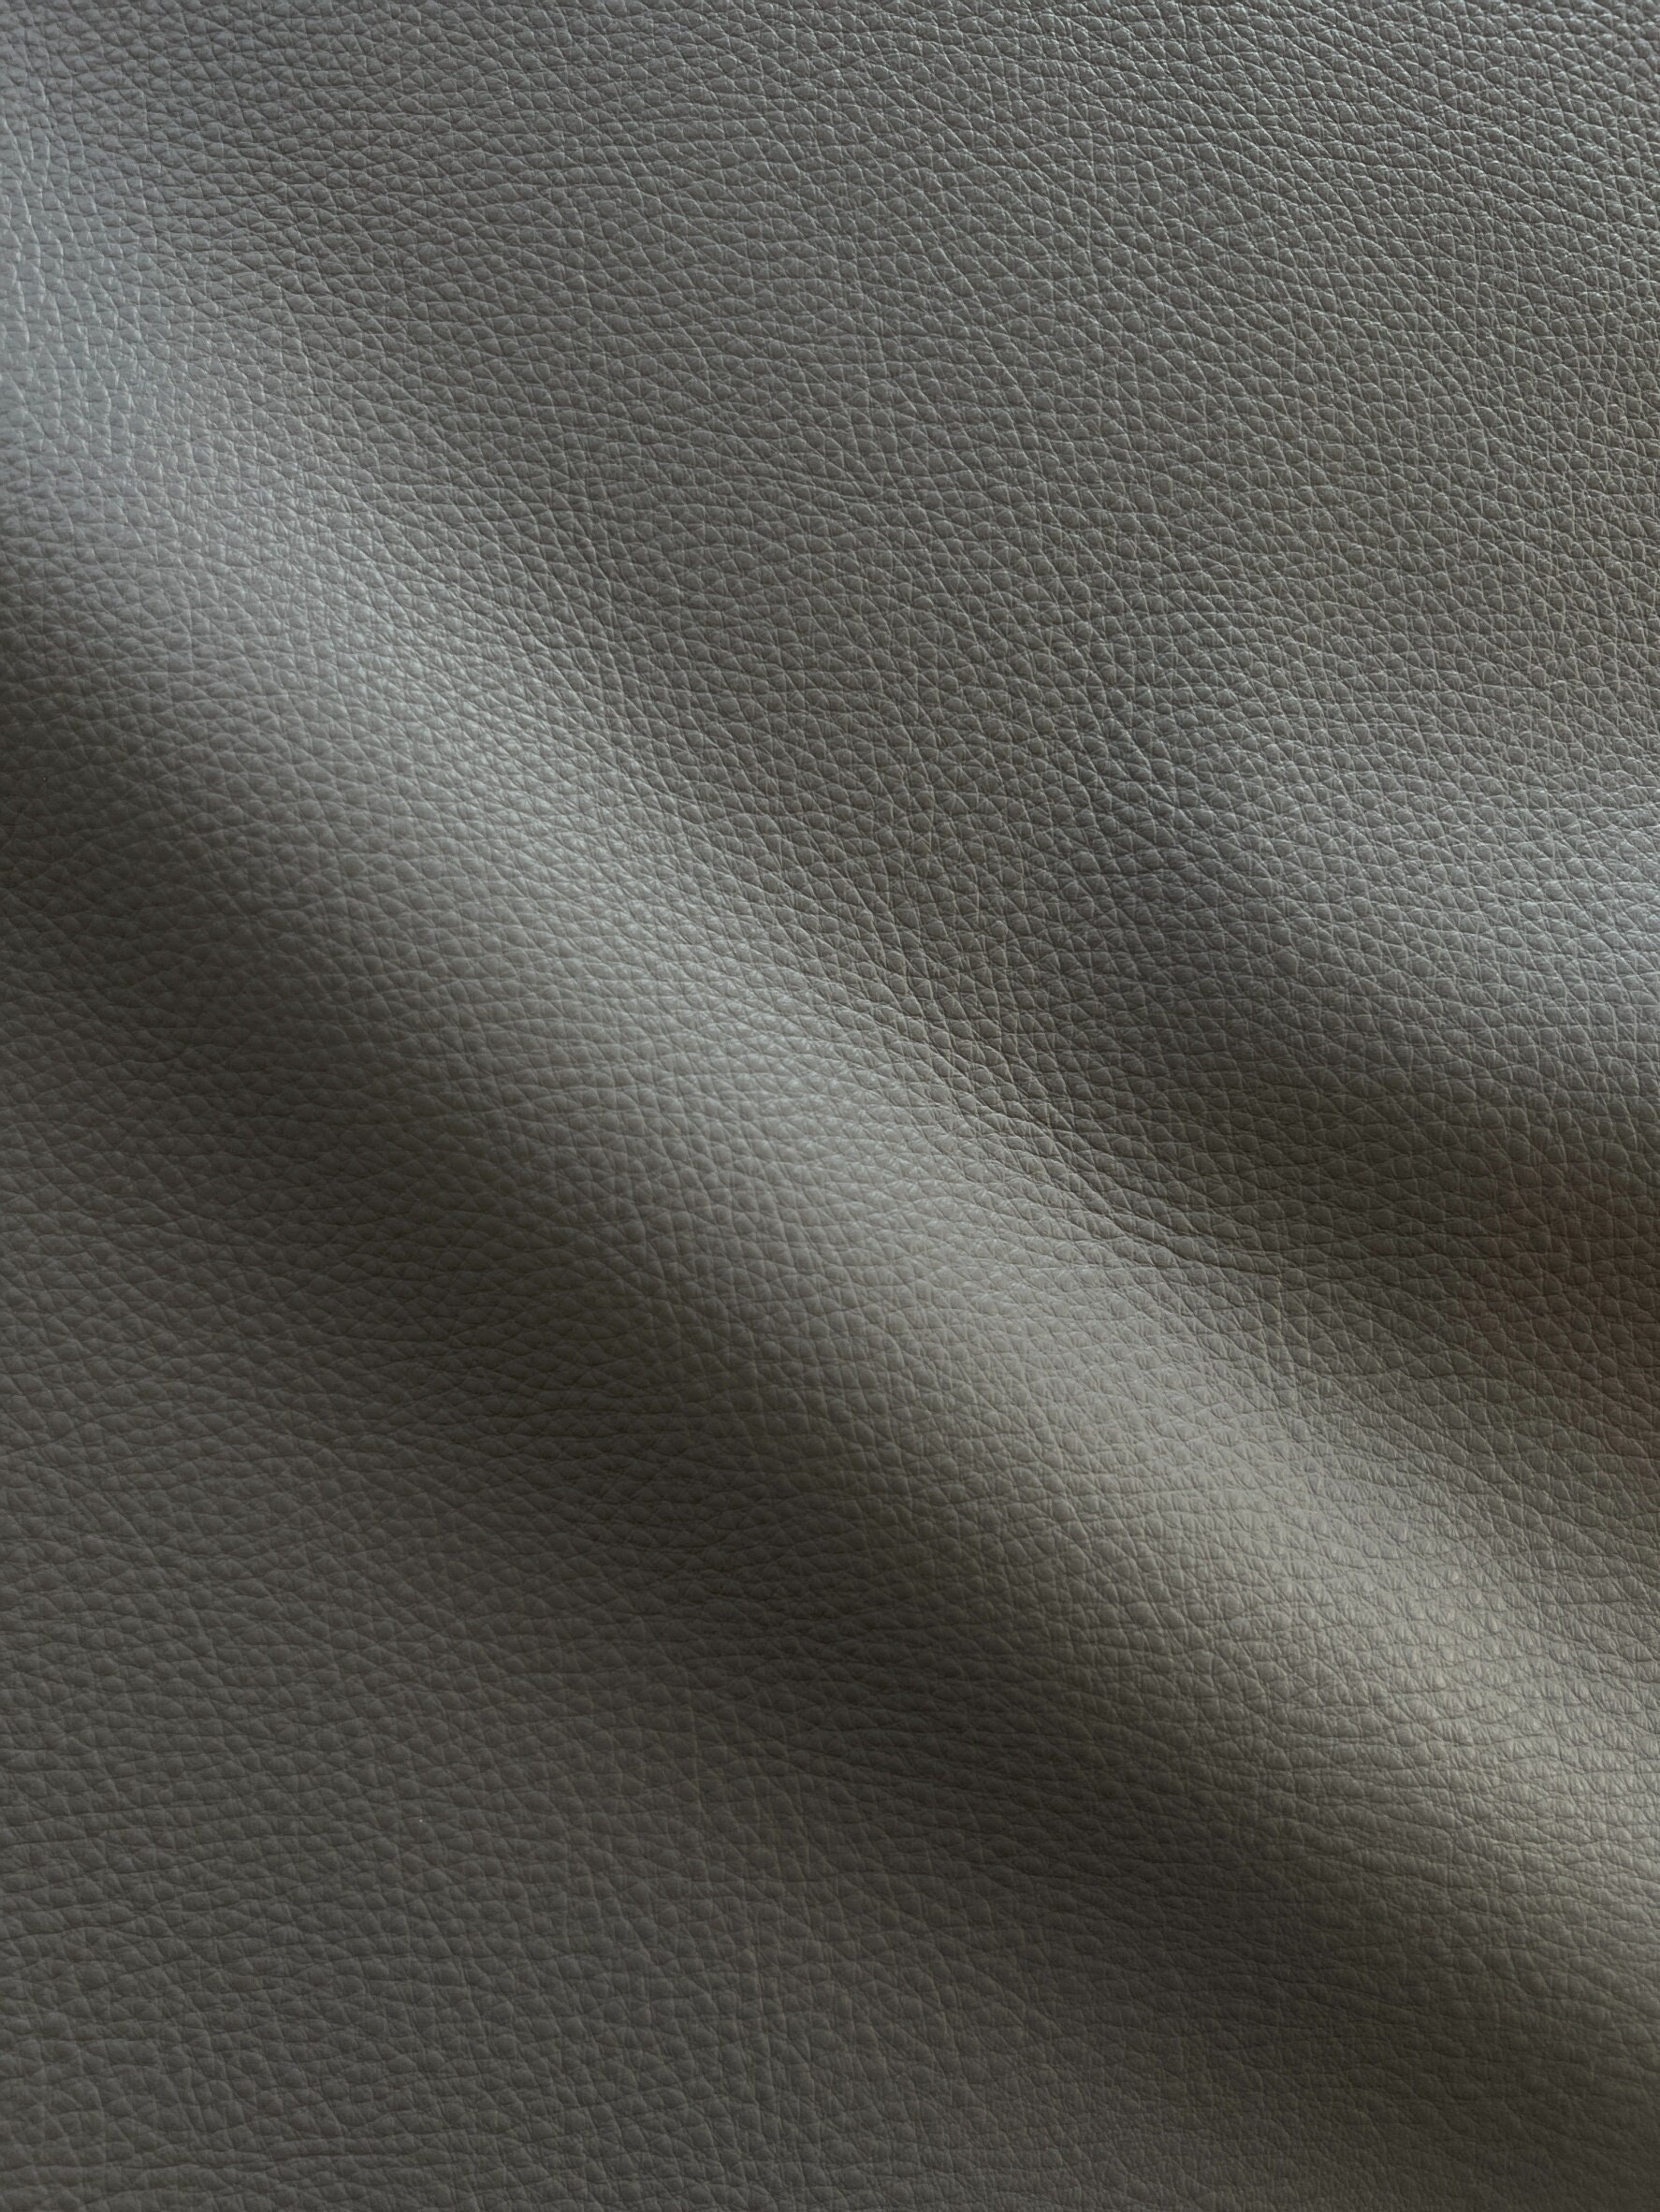 Breathable Faux Leather Grey, Very Heavyweight Faux Leather, Vinyl Fabric, Home Decor Fabric